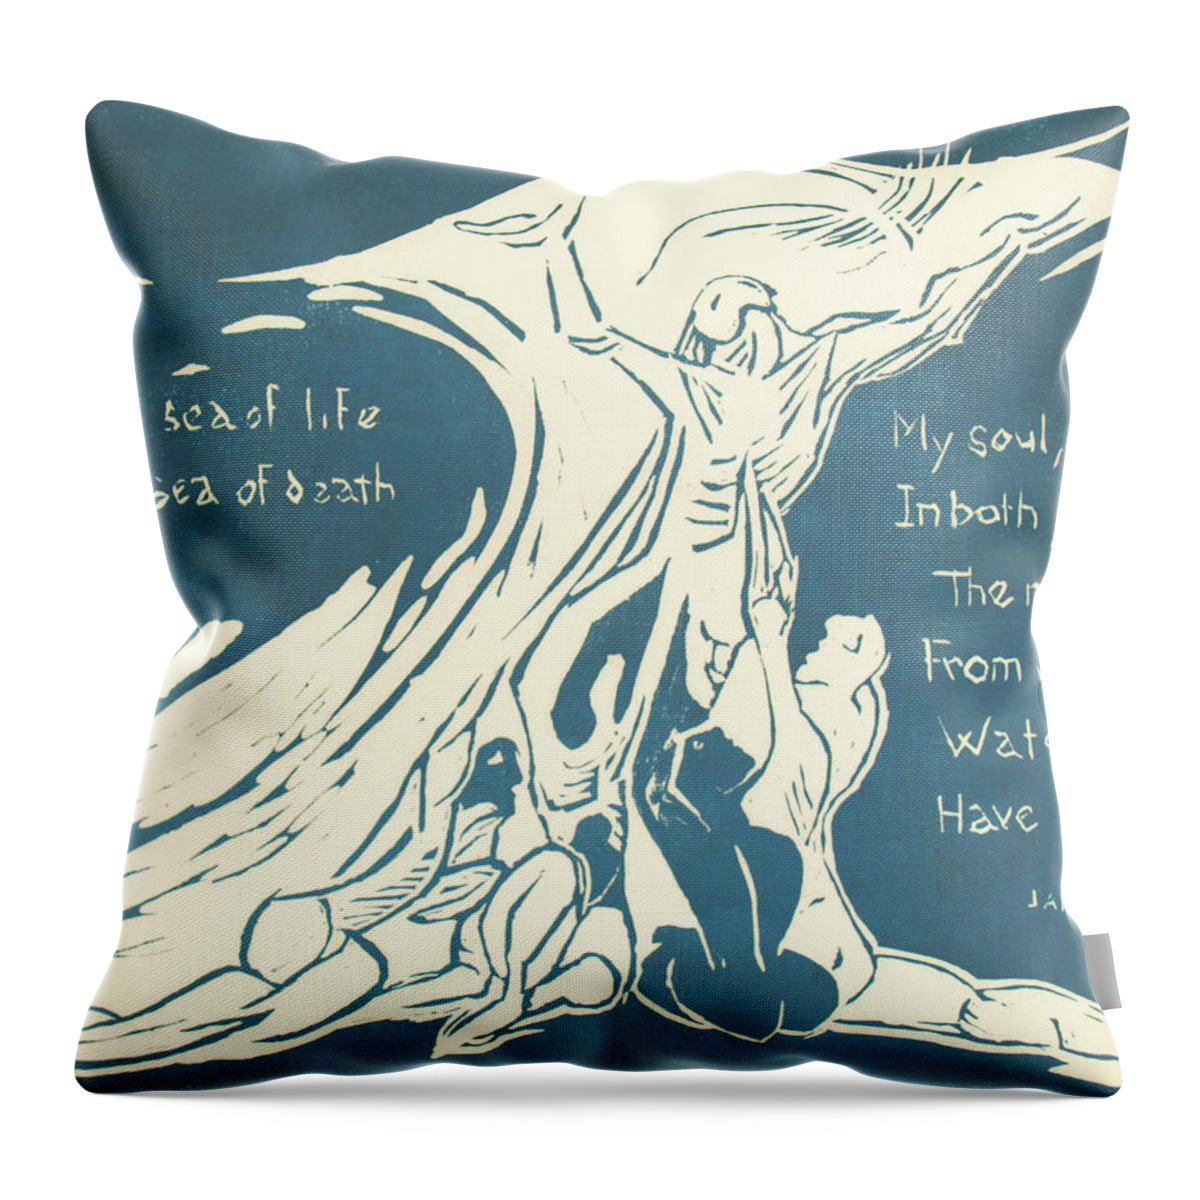 Sea Of Life Sea Of Death Throw Pillow featuring the drawing Sea of Life by Judy Frisk